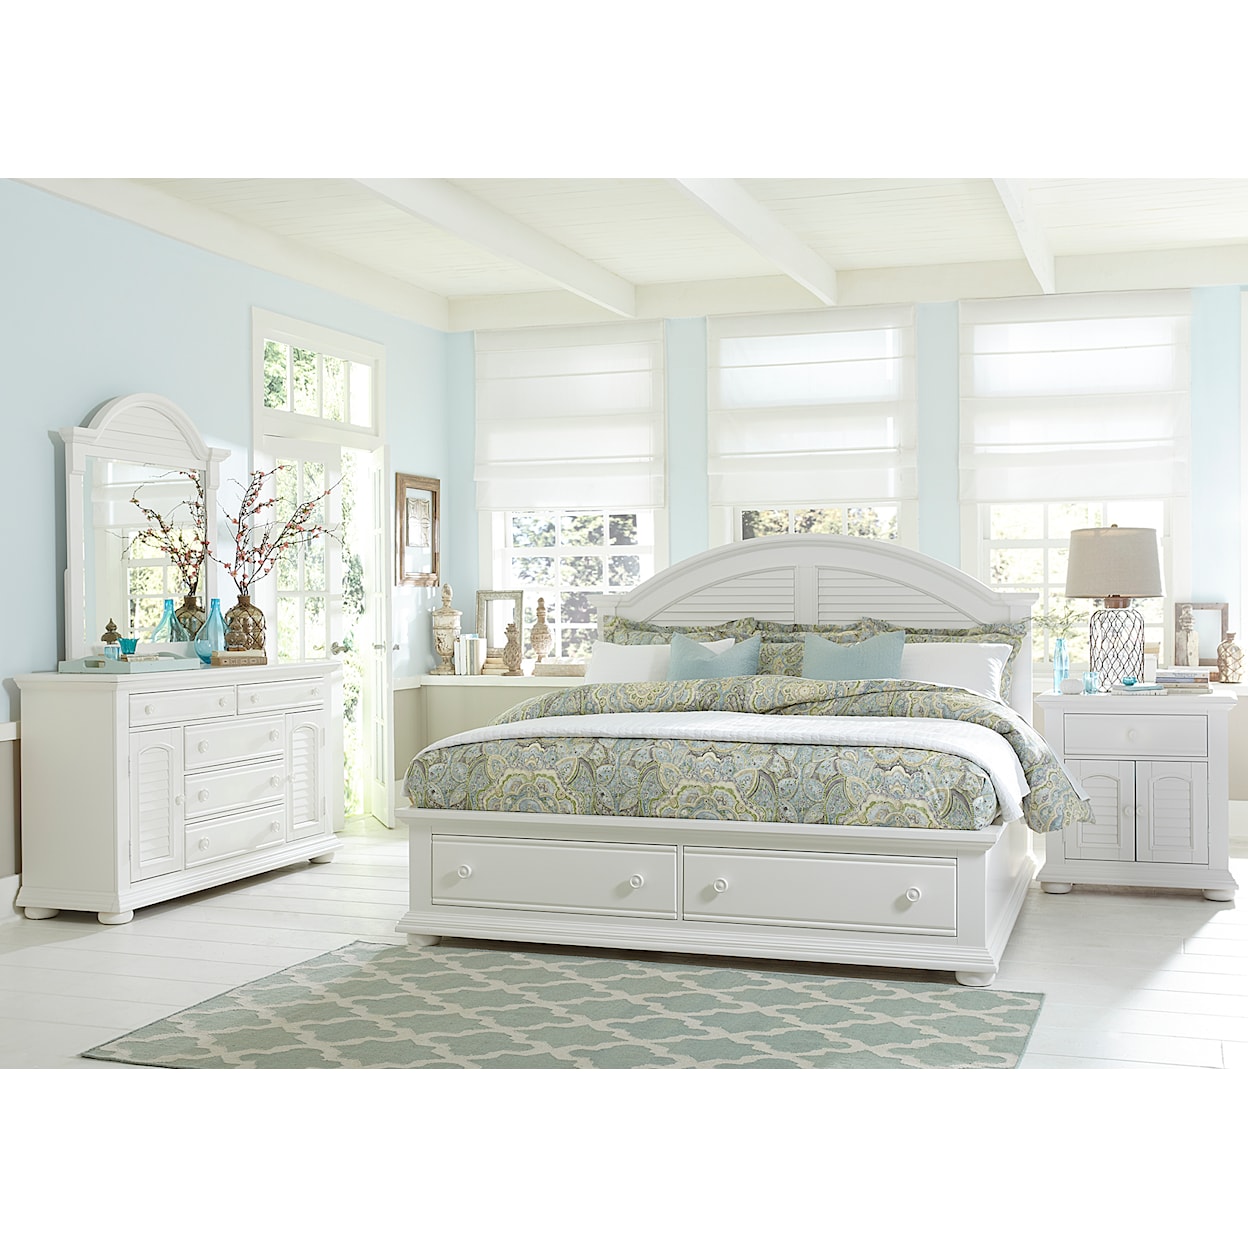 Liberty Furniture Summer House 4-Piece King Storage Bedroom Group